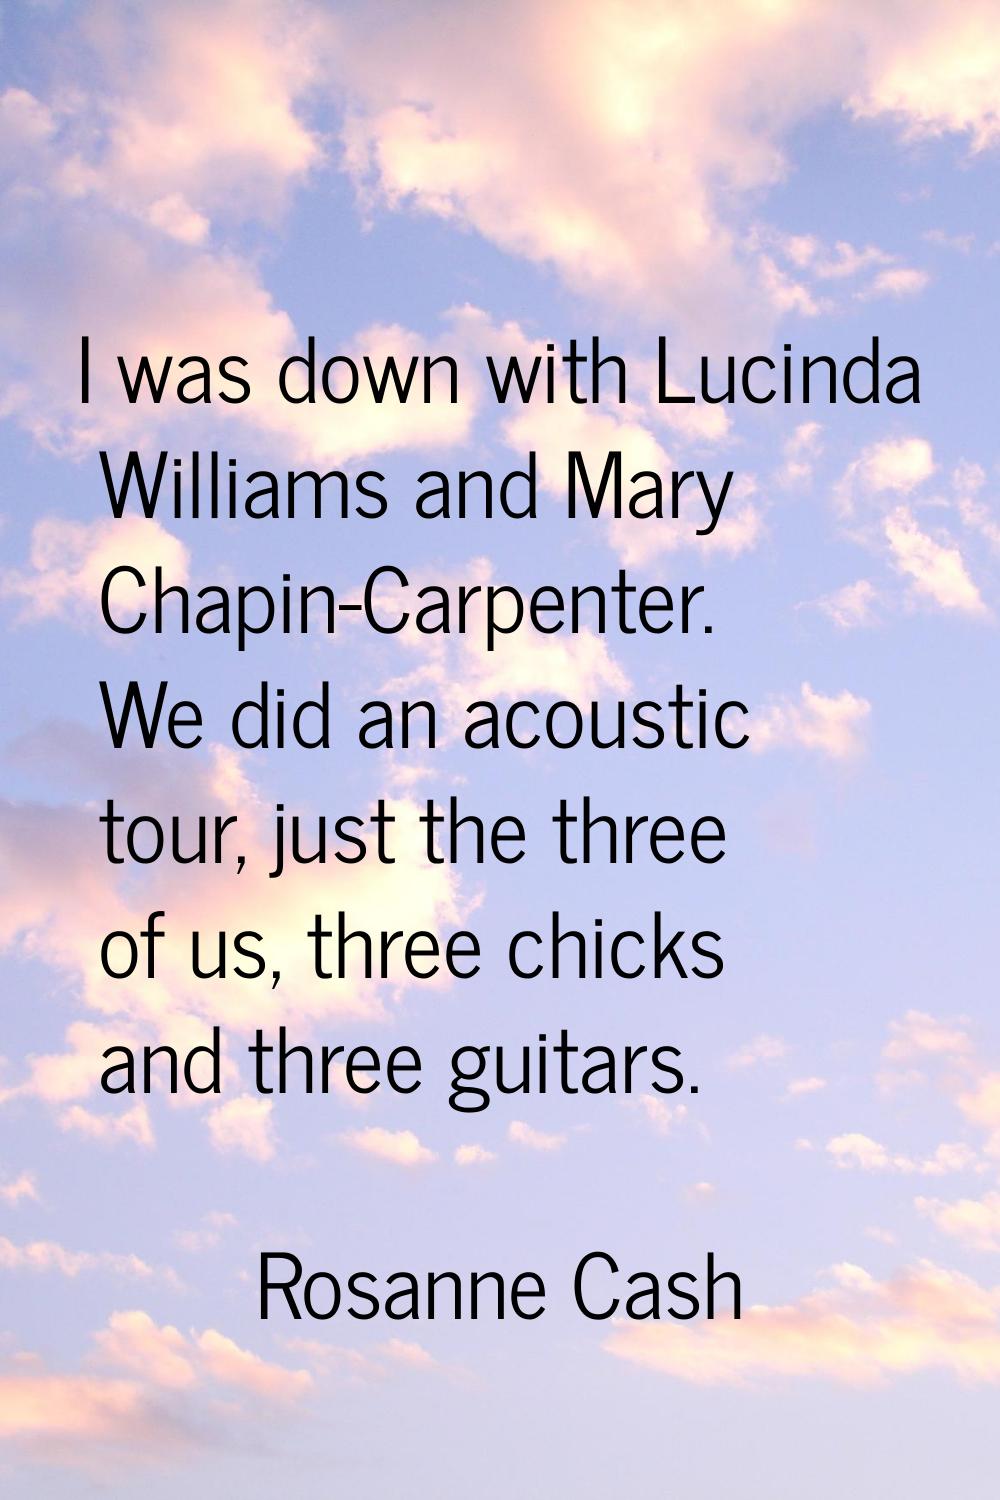 I was down with Lucinda Williams and Mary Chapin-Carpenter. We did an acoustic tour, just the three